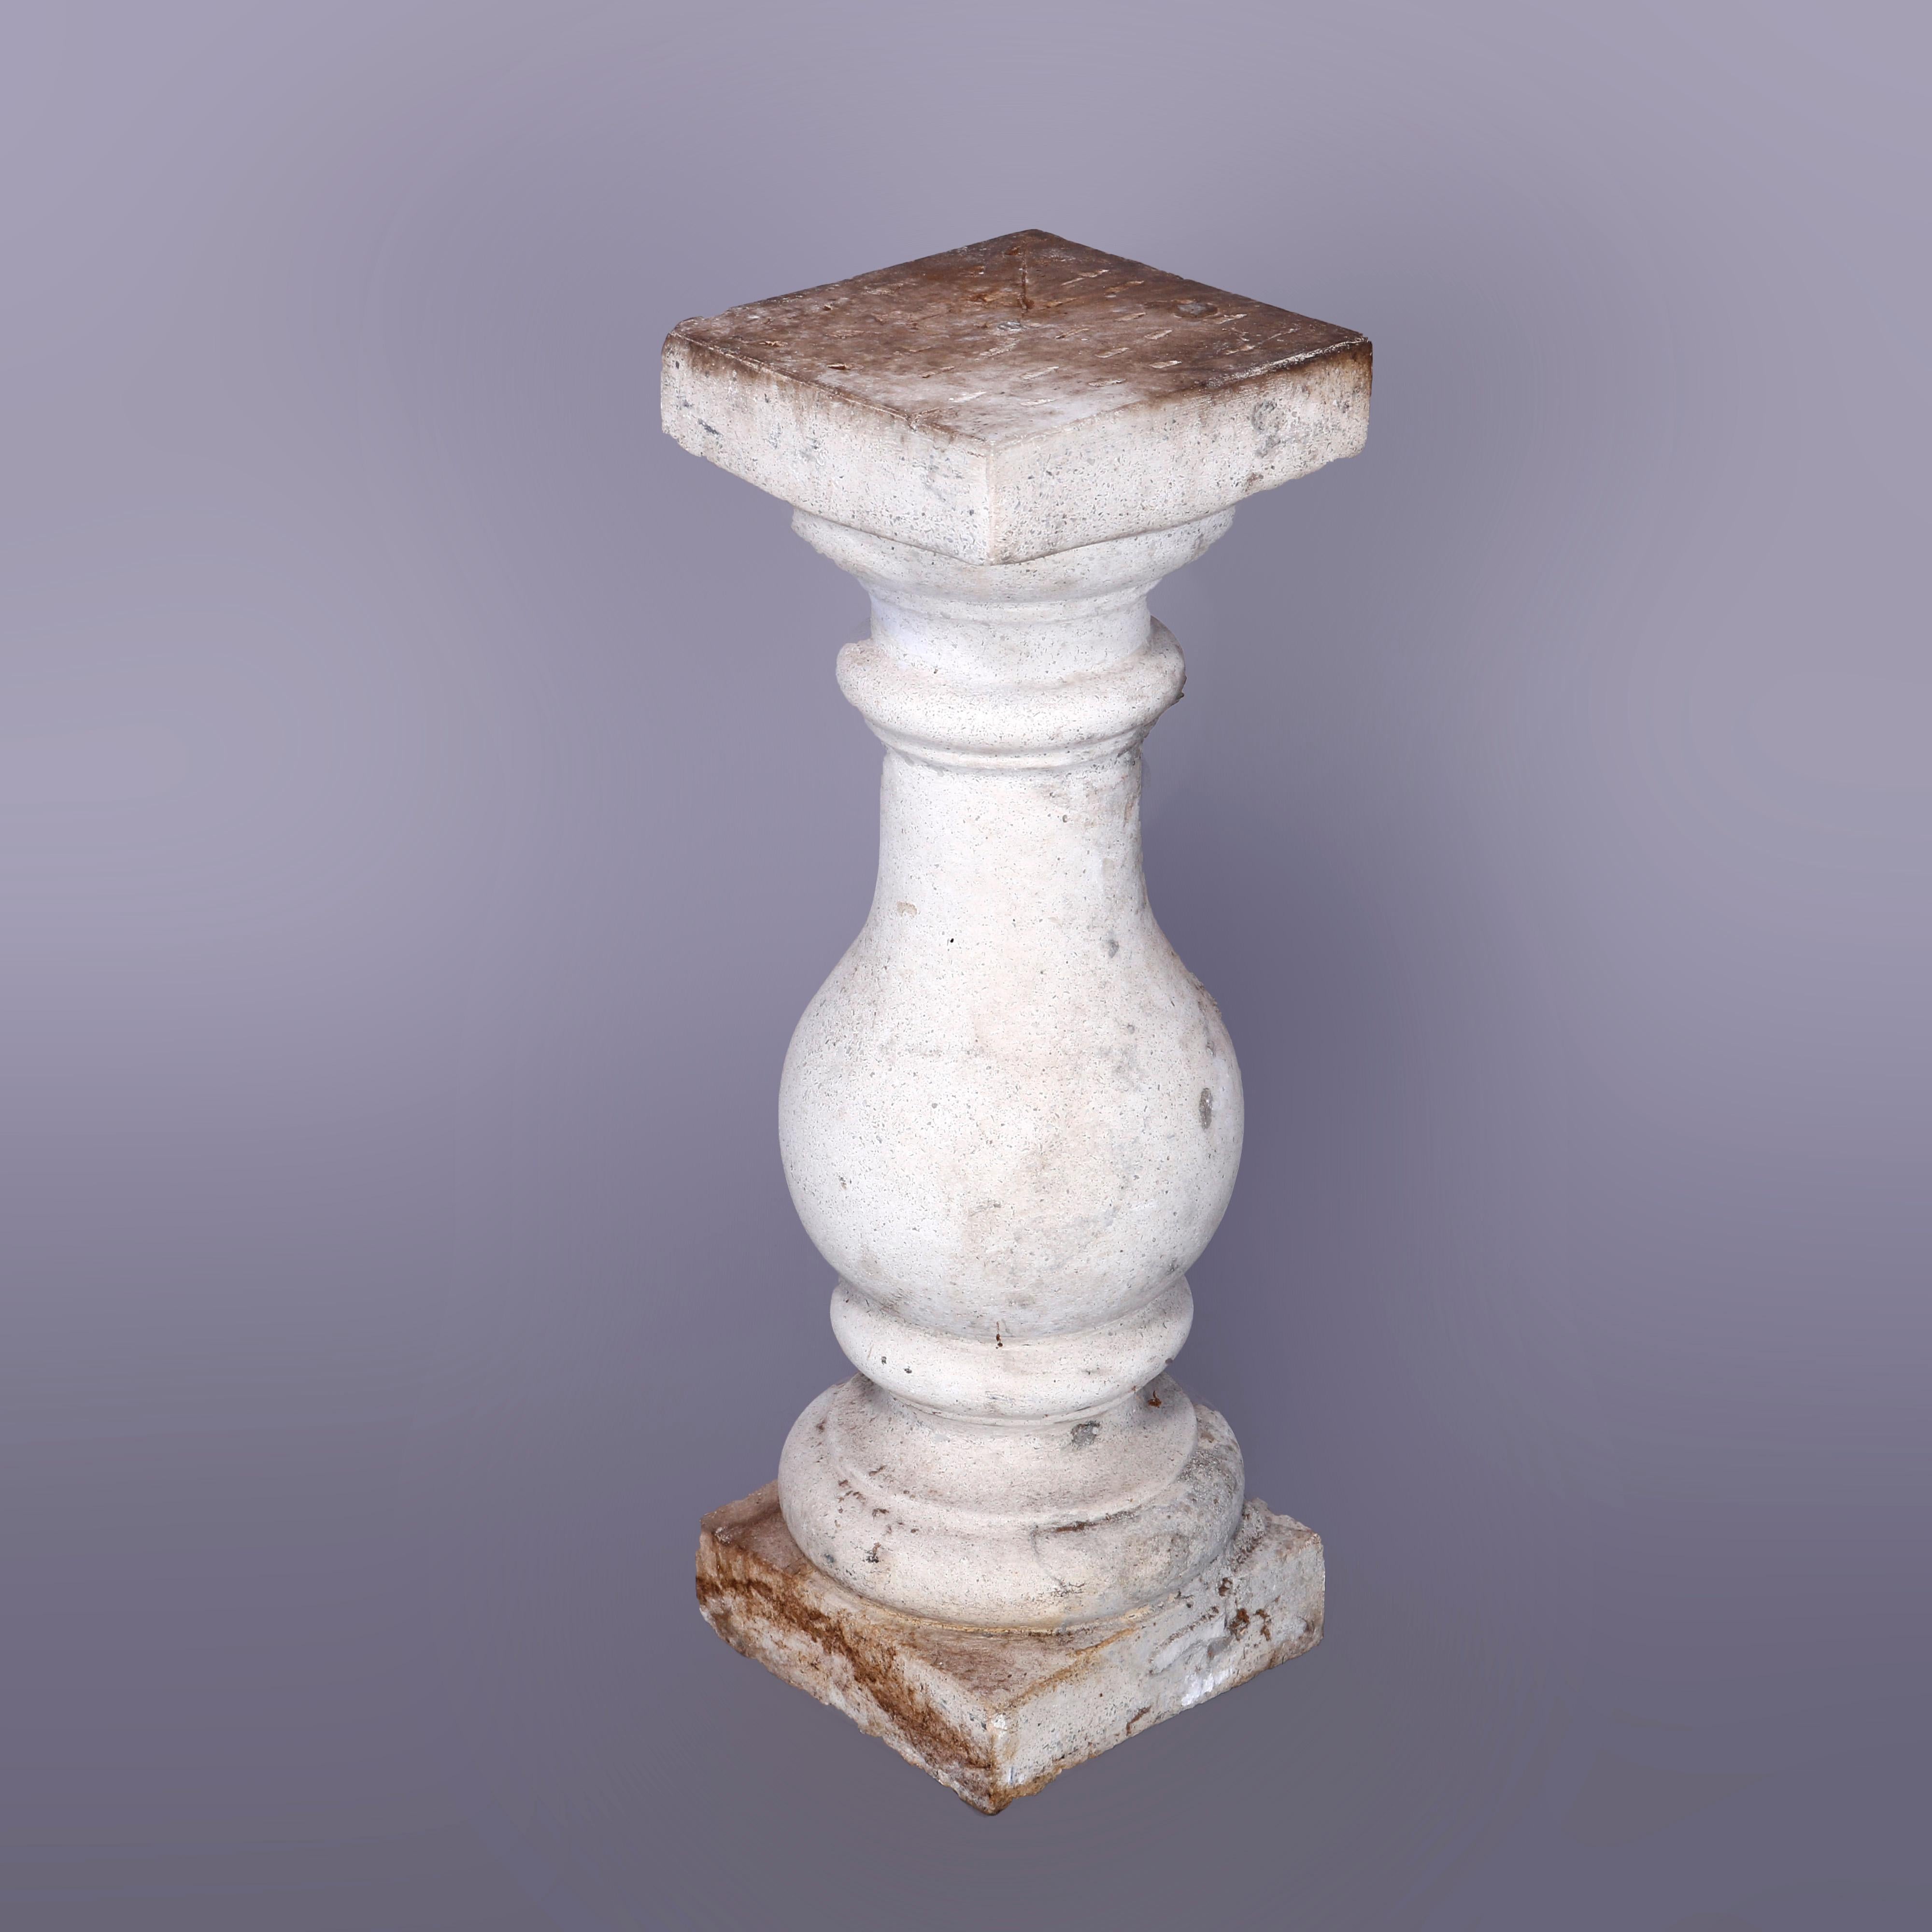 A Classical balustrade pedestal offers cast hard stone construction in column form with square sculpture display, 20th century

Measures - 23.25'' H x 7.75'' W x 7.75'' D.

Catalogue Note: Ask about DISCOUNTED DELIVERY RATES available to most